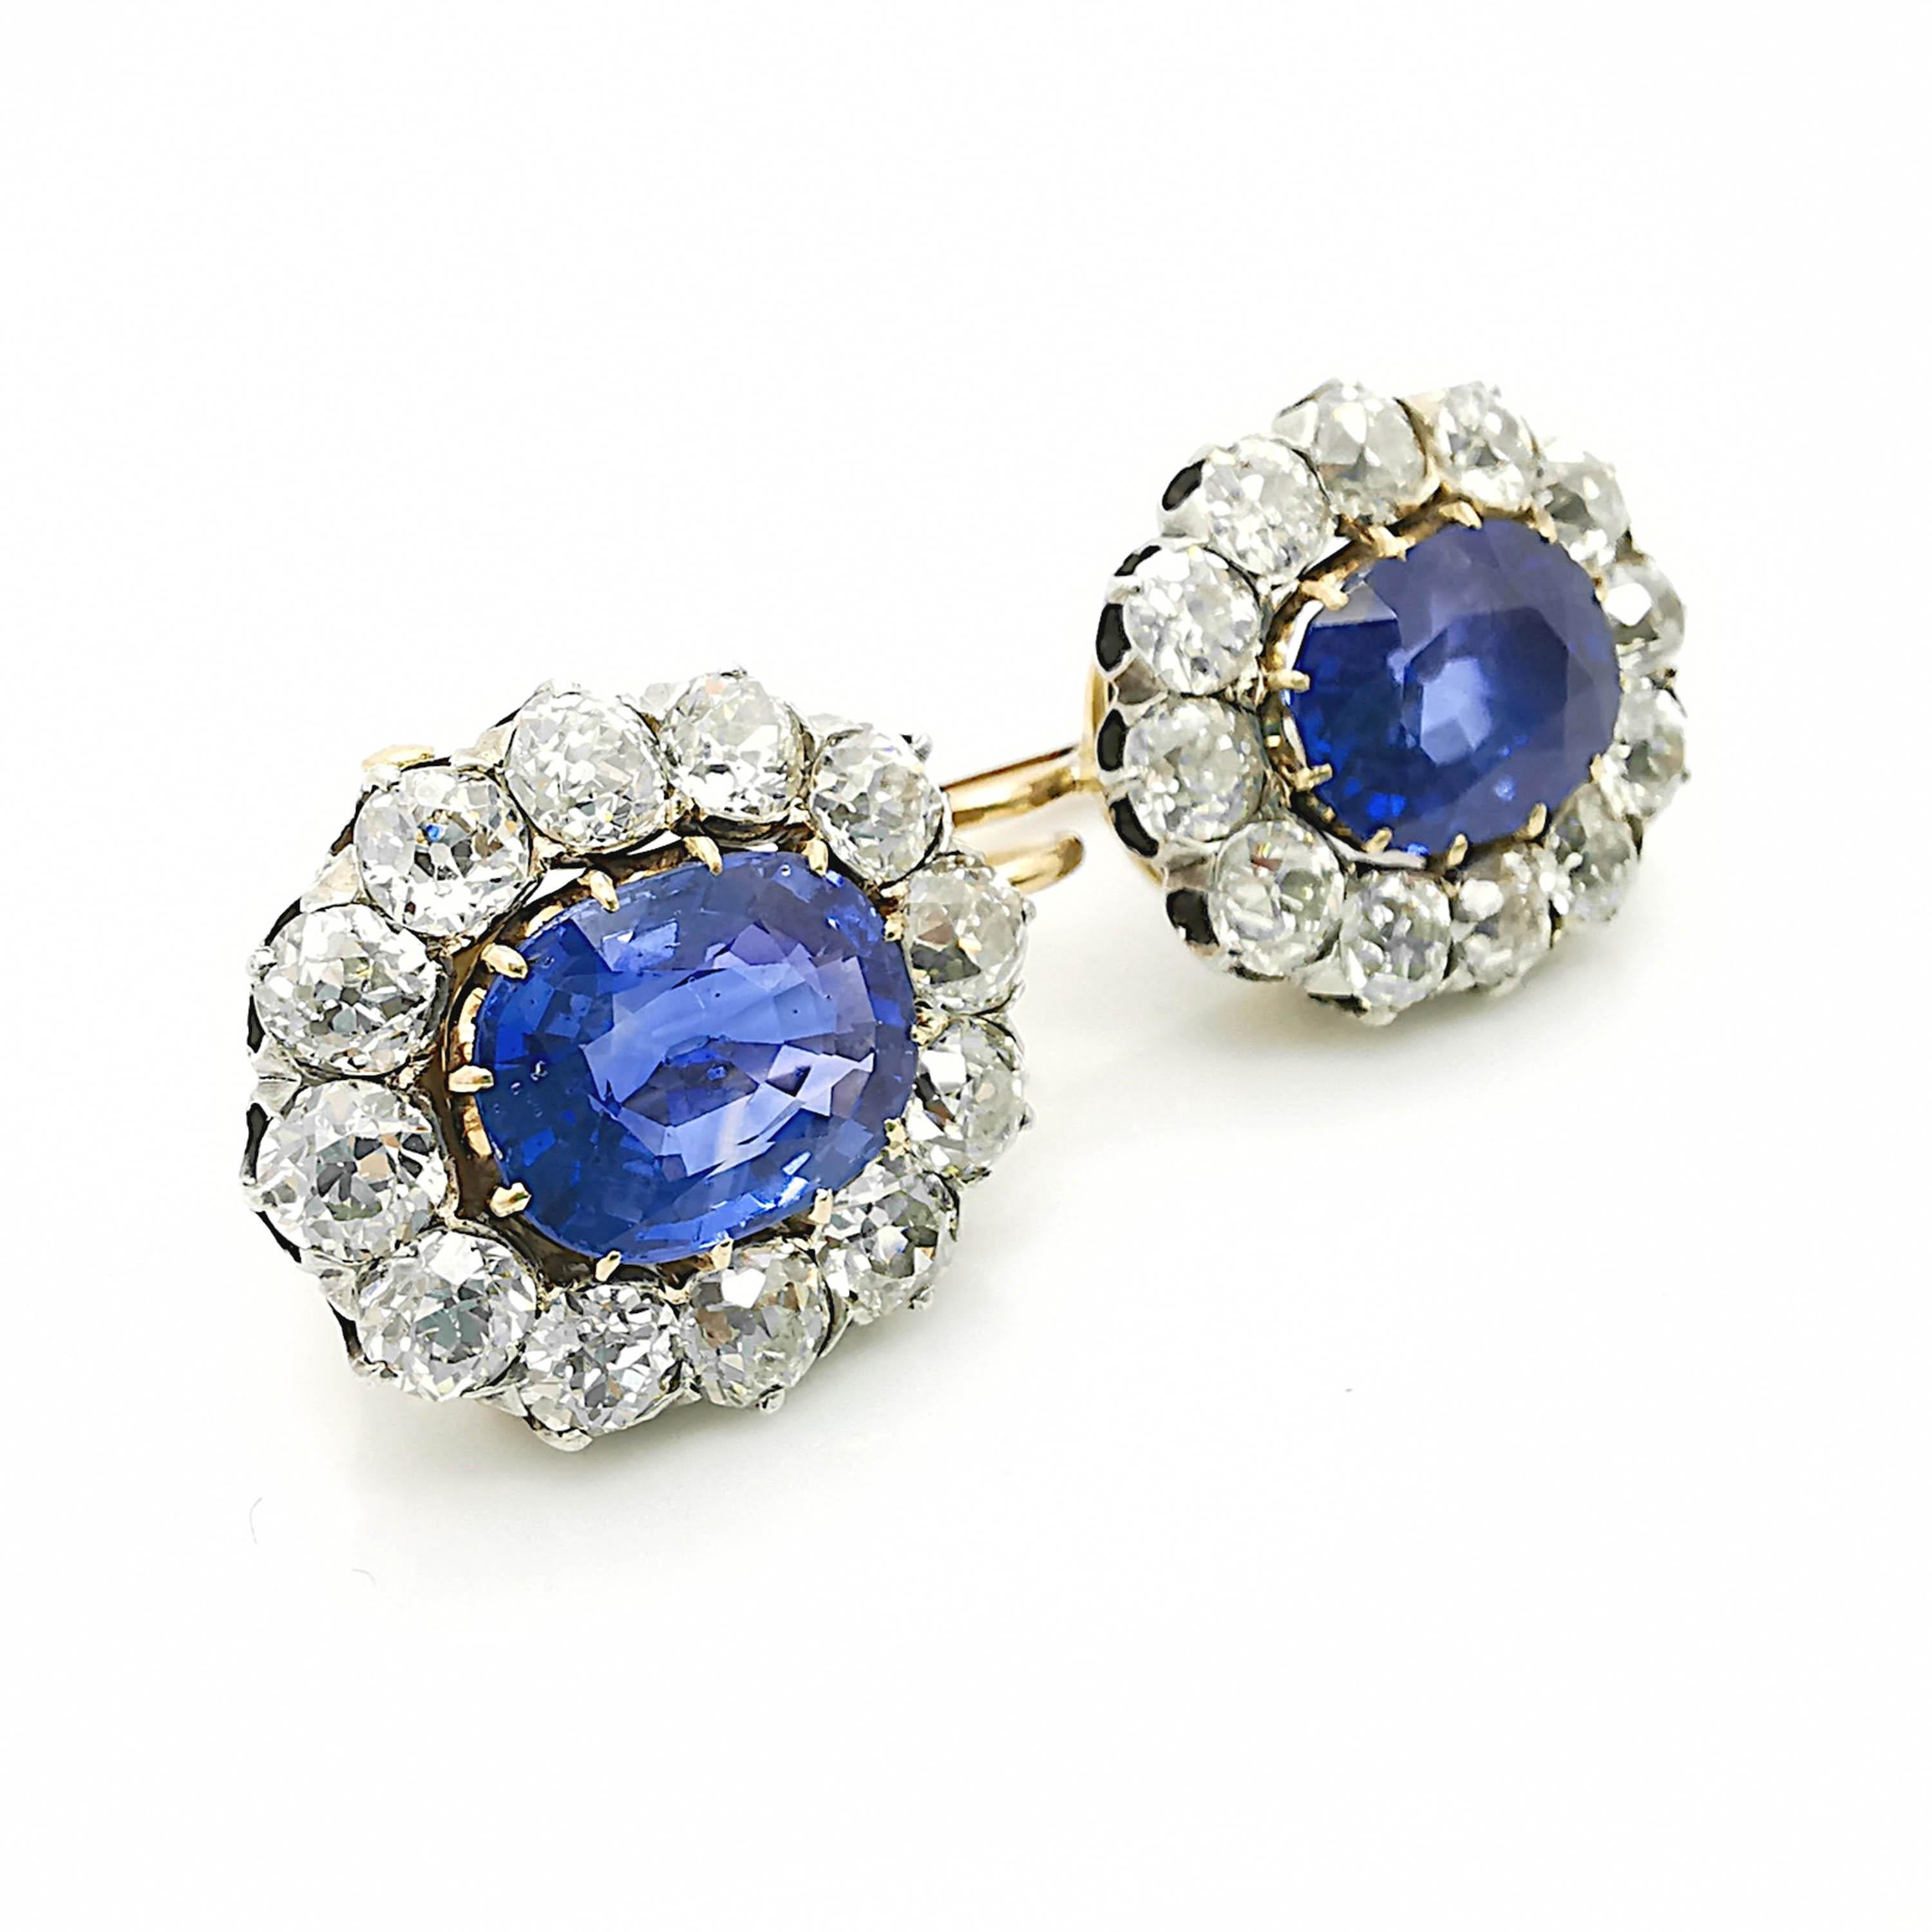 Late Victorian Sapphire And Diamond Cluster Earrings, Platinum And Gold, Circa 1890 For Sale